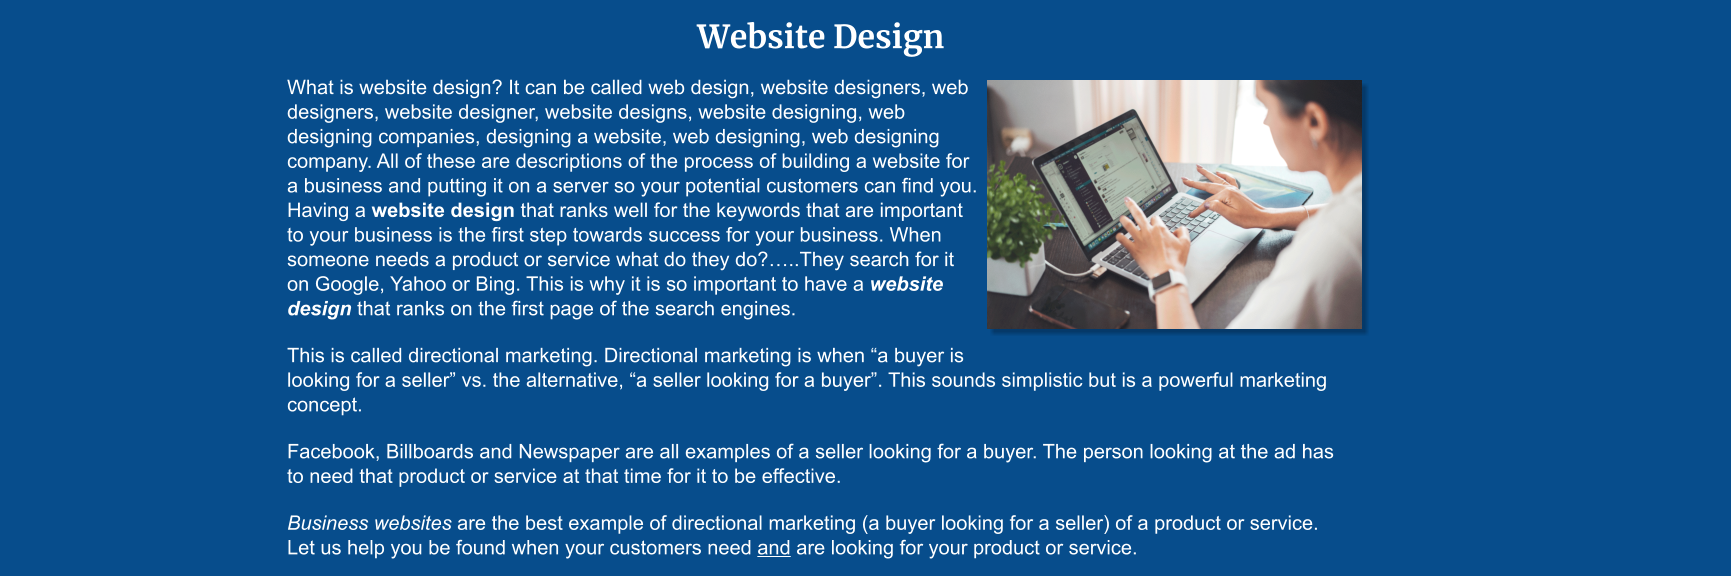 Website Design What is website design? It can be called web design, website designers, web designers, website designer, website designs, website designing, web designing companies, designing a website, web designing, web designing company. All of these are descriptions of the process of building a website for a business and putting it on a server so your potential customers can find you. Having a website design that ranks well for the keywords that are important to your business is the first step towards success for your business. When someone needs a product or service what do they do?…..They search for it on Google, Yahoo or Bing. This is why it is so important to have a website design that ranks on the first page of the search engines.  This is called directional marketing. Directional marketing is when “a buyer is looking for a seller” vs. the alternative, “a seller looking for a buyer”. This sounds simplistic but is a powerful marketing concept.  Facebook, Billboards and Newspaper are all examples of a seller looking for a buyer. The person looking at the ad has to need that product or service at that time for it to be effective.  Business websites are the best example of directional marketing (a buyer looking for a seller) of a product or service. Let us help you be found when your customers need and are looking for your product or service.